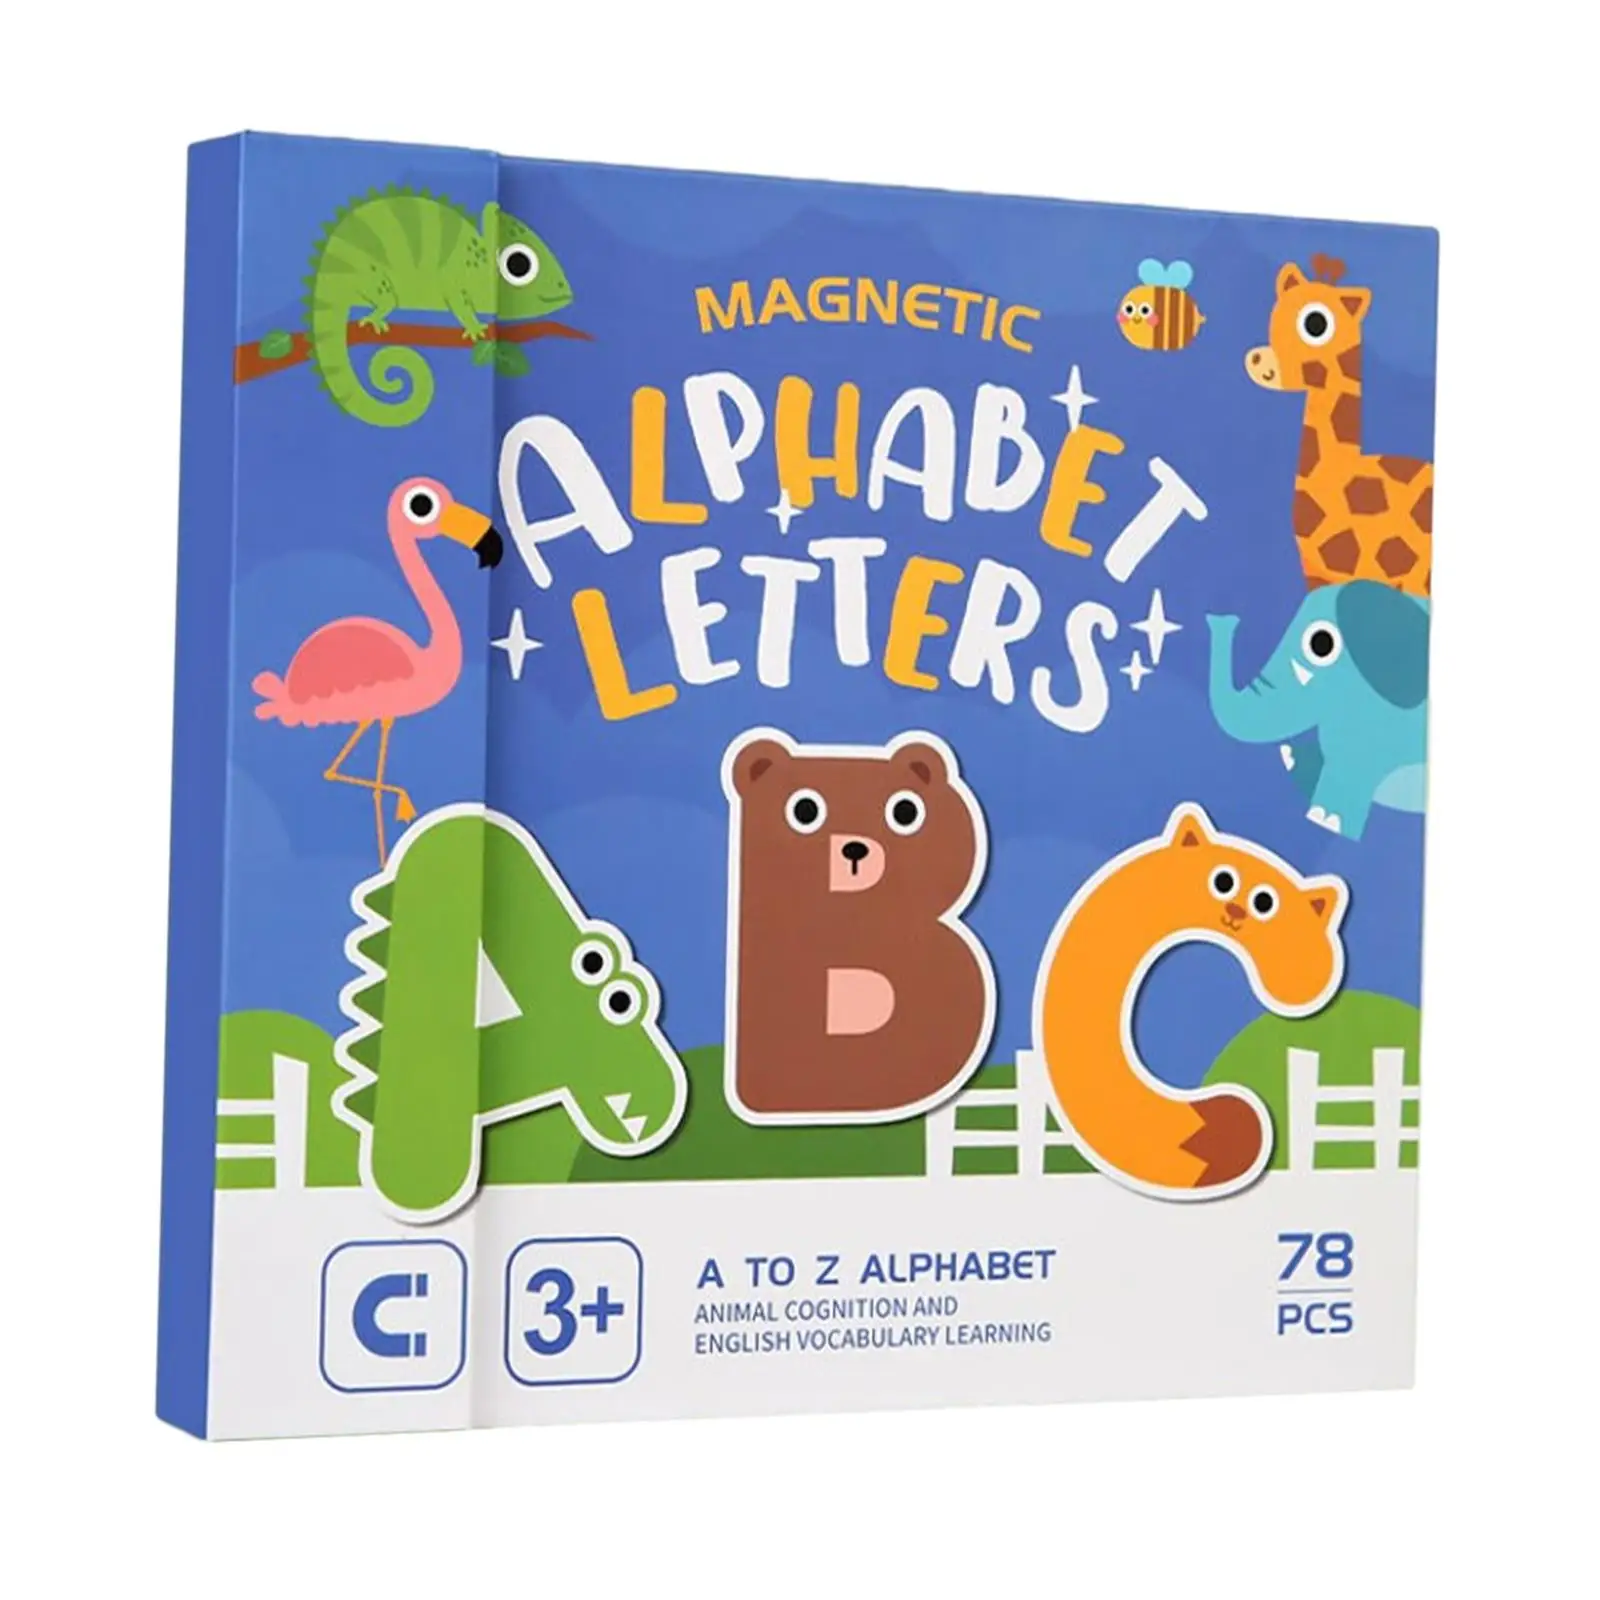 

Magnetic Letters Toys Language Development for Preschool Kids Birthday Gifts